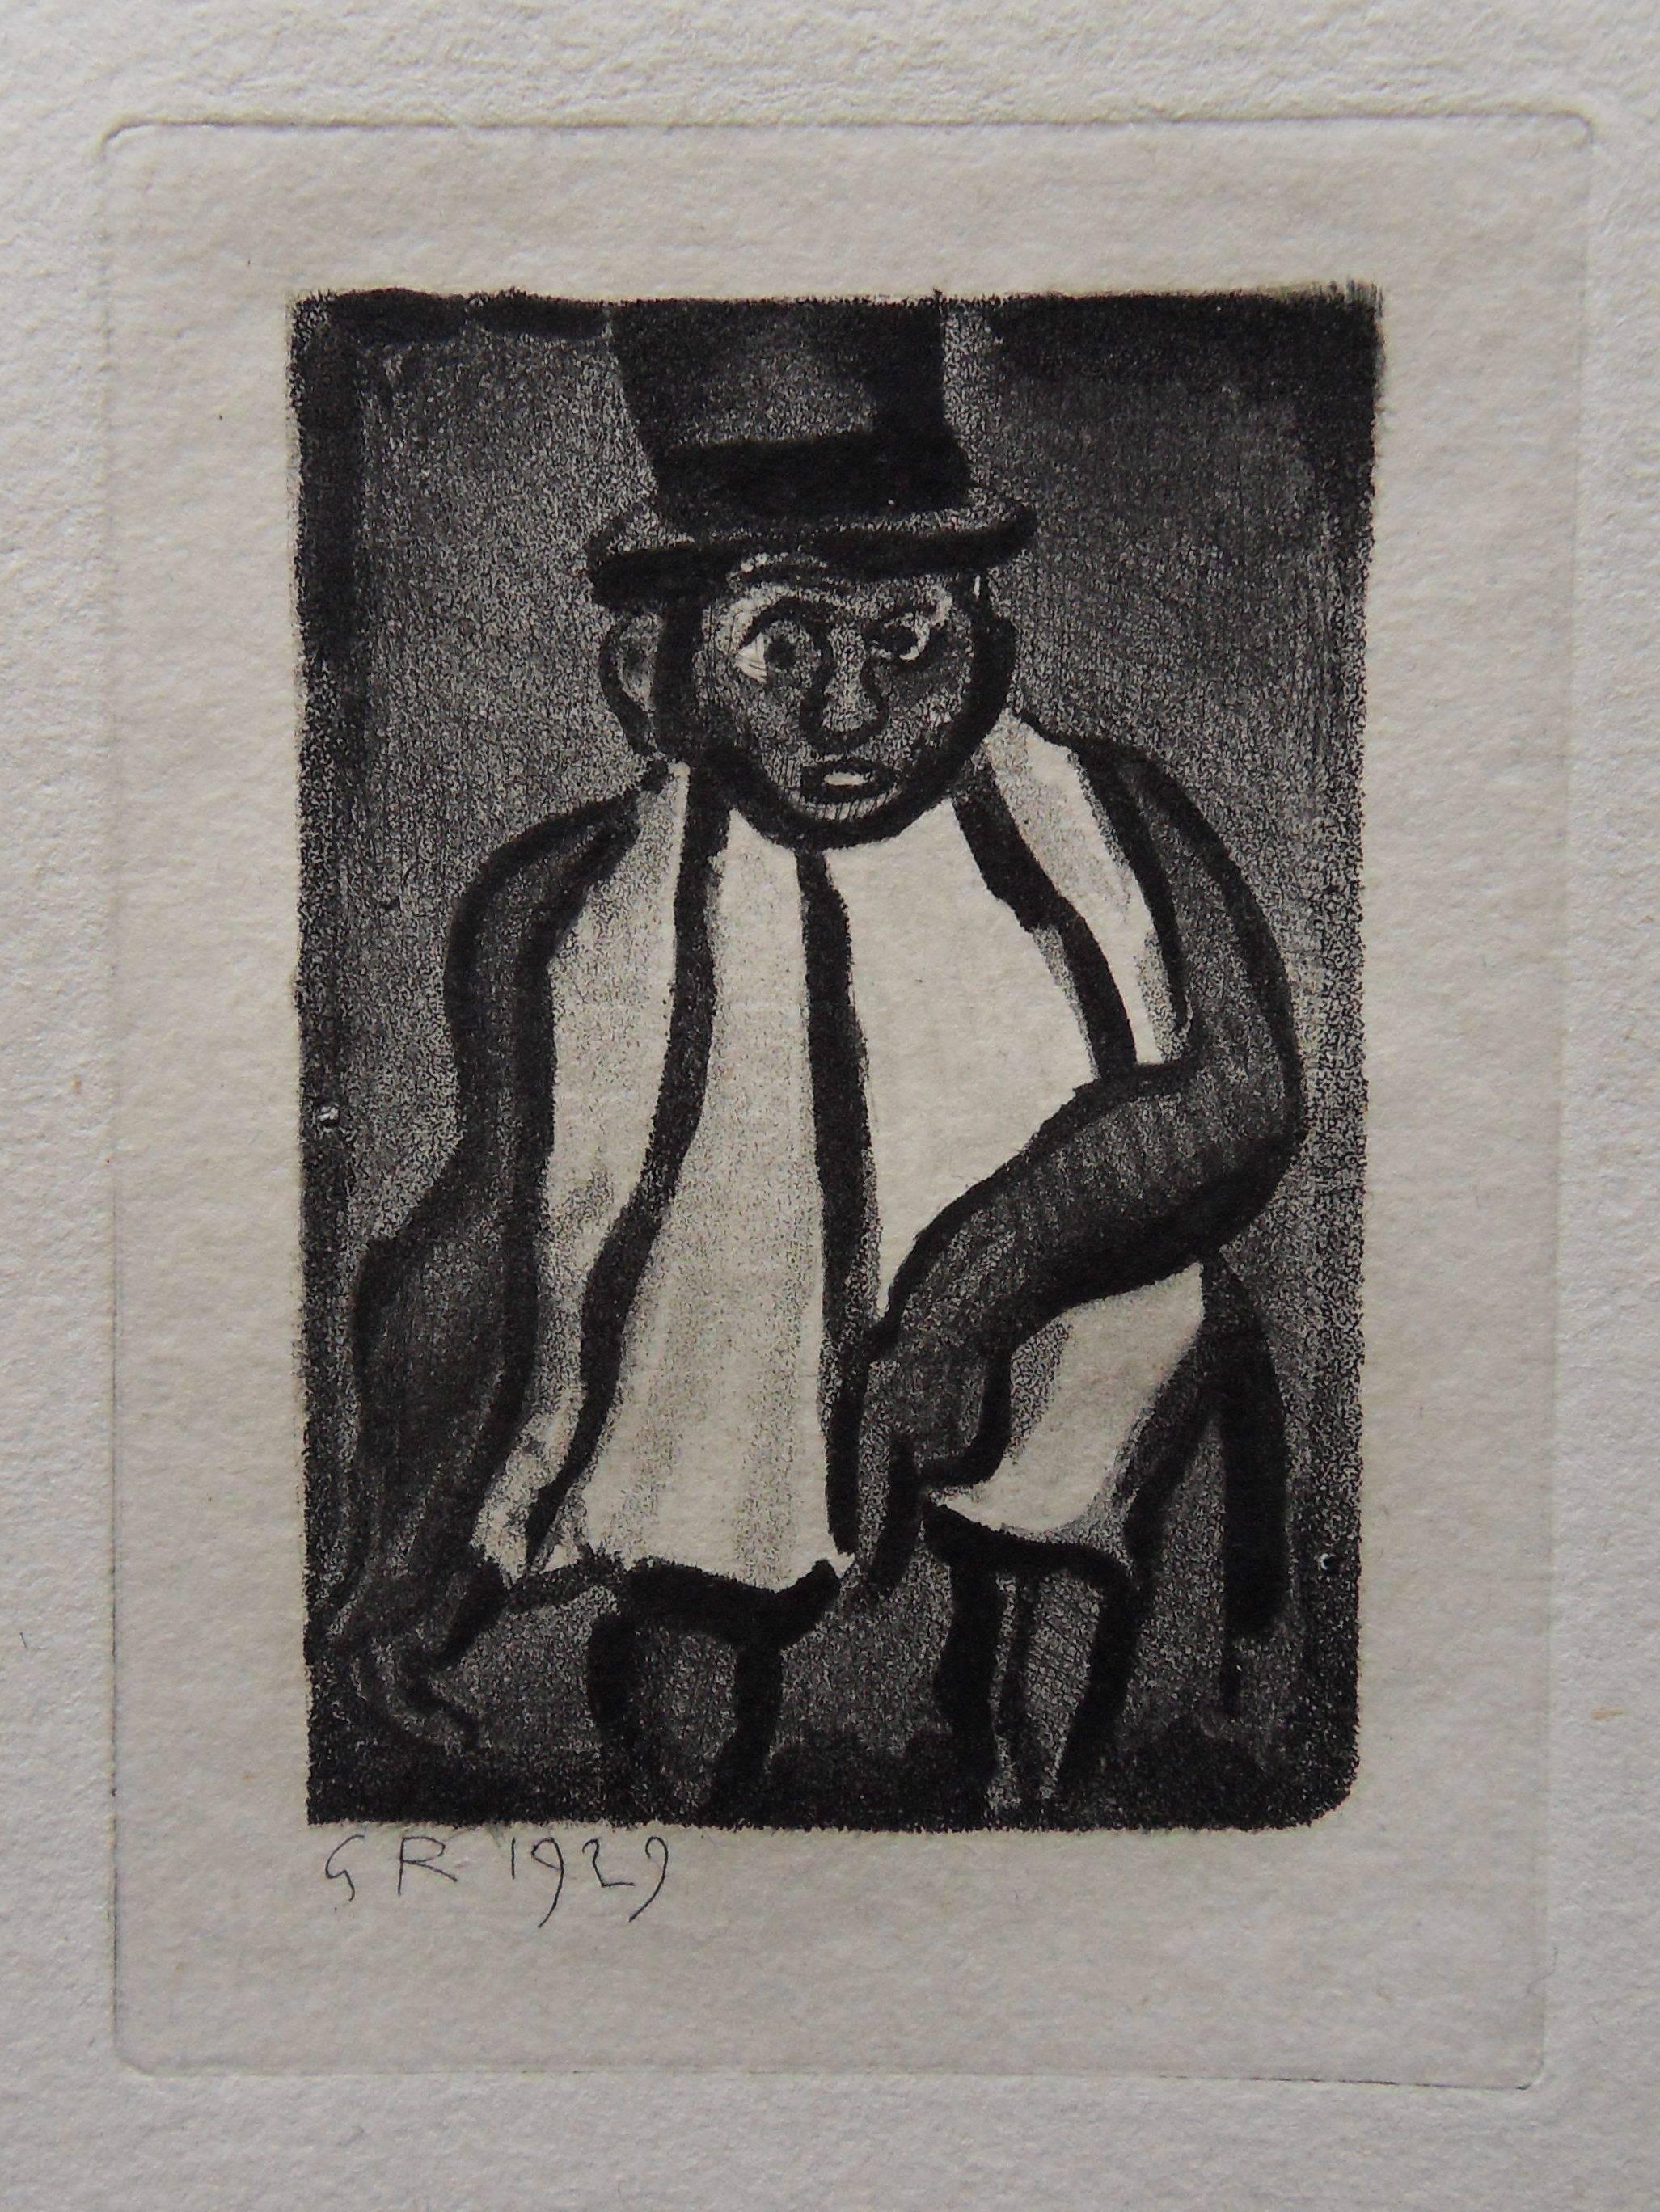 Georges Rouault Figurative Print - Elegant Man with a Top Hat - Original etching - 1929